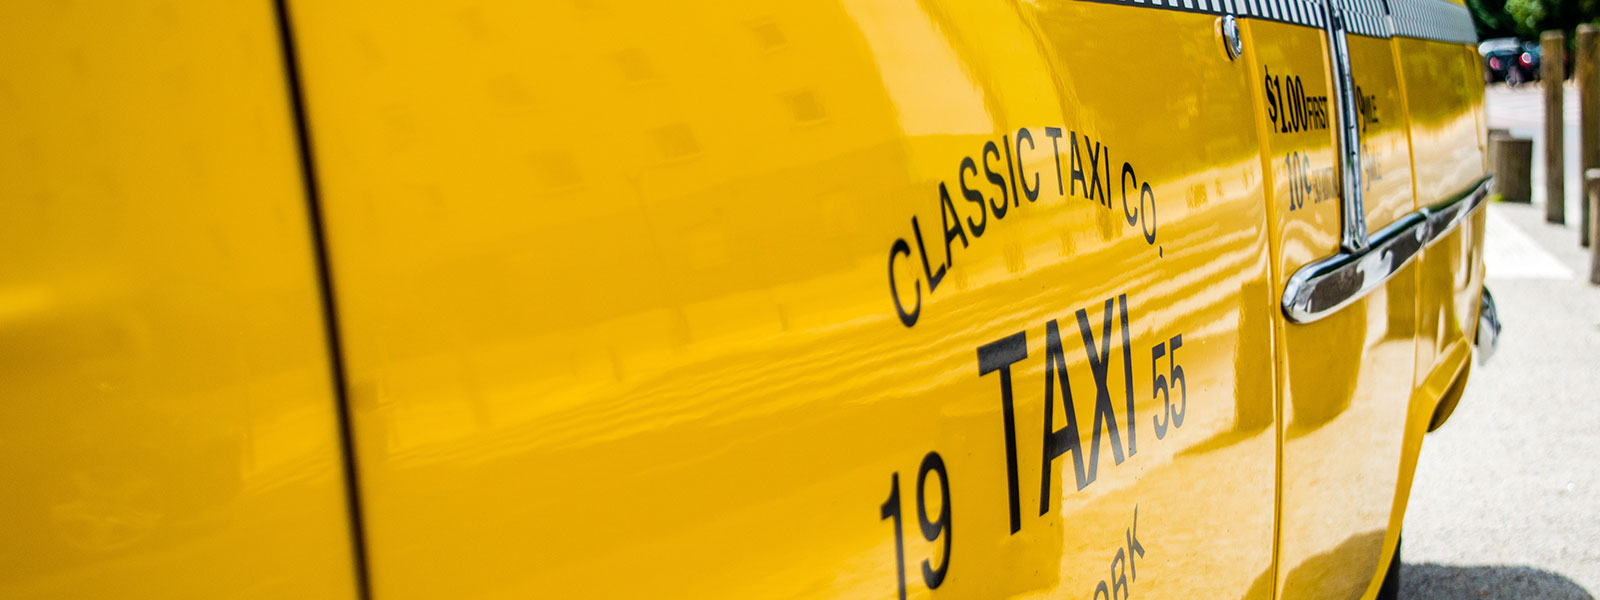 The side of a classic New York City taxi cab.